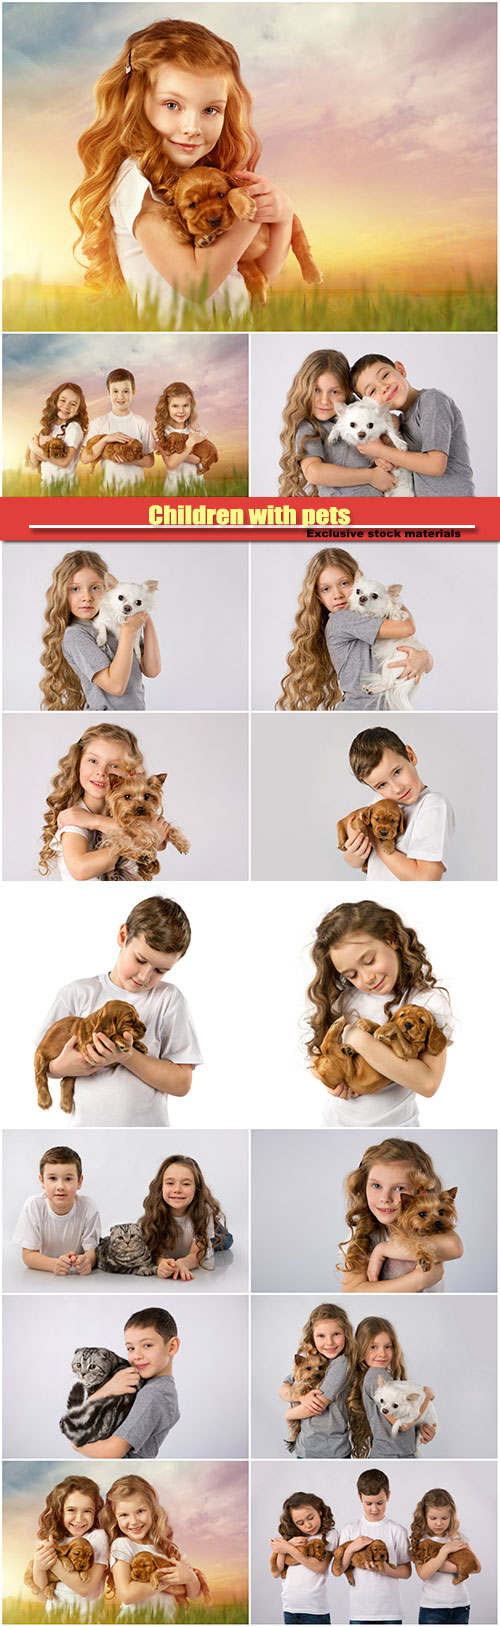 Children with pets, cat and a dog